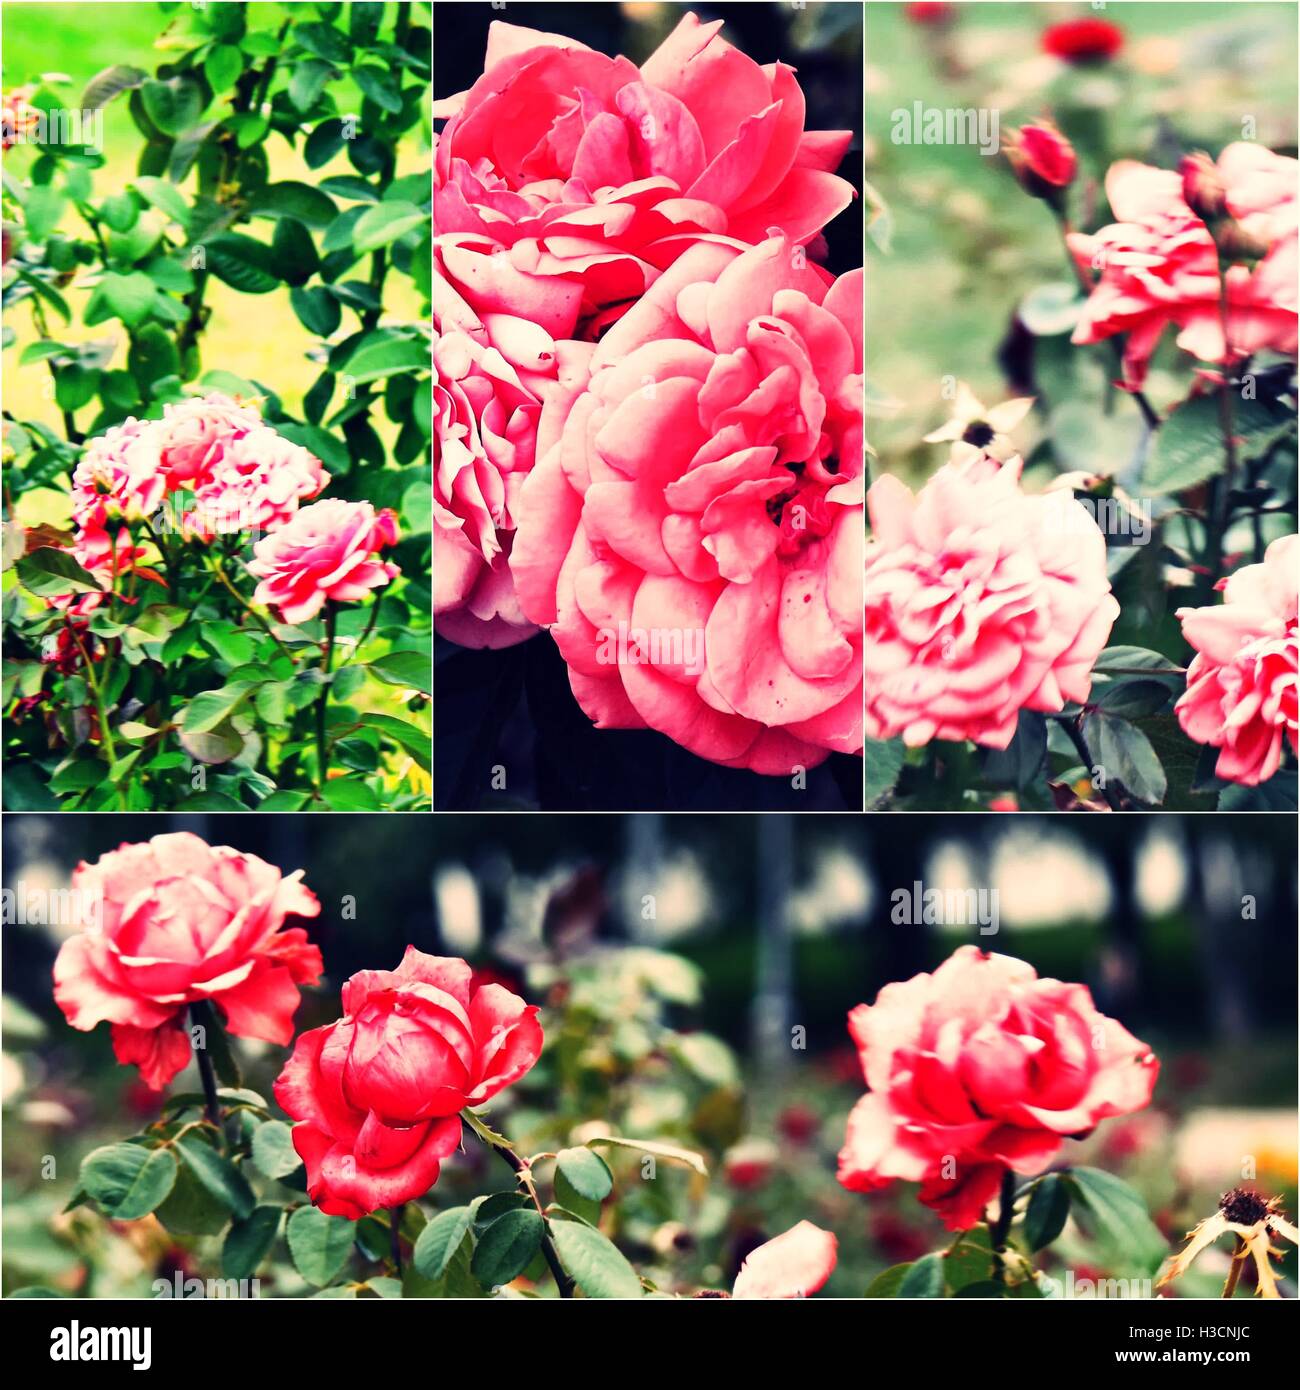 Garden roses on bush. Collage of colorized images. Toned photos set Stock Photo